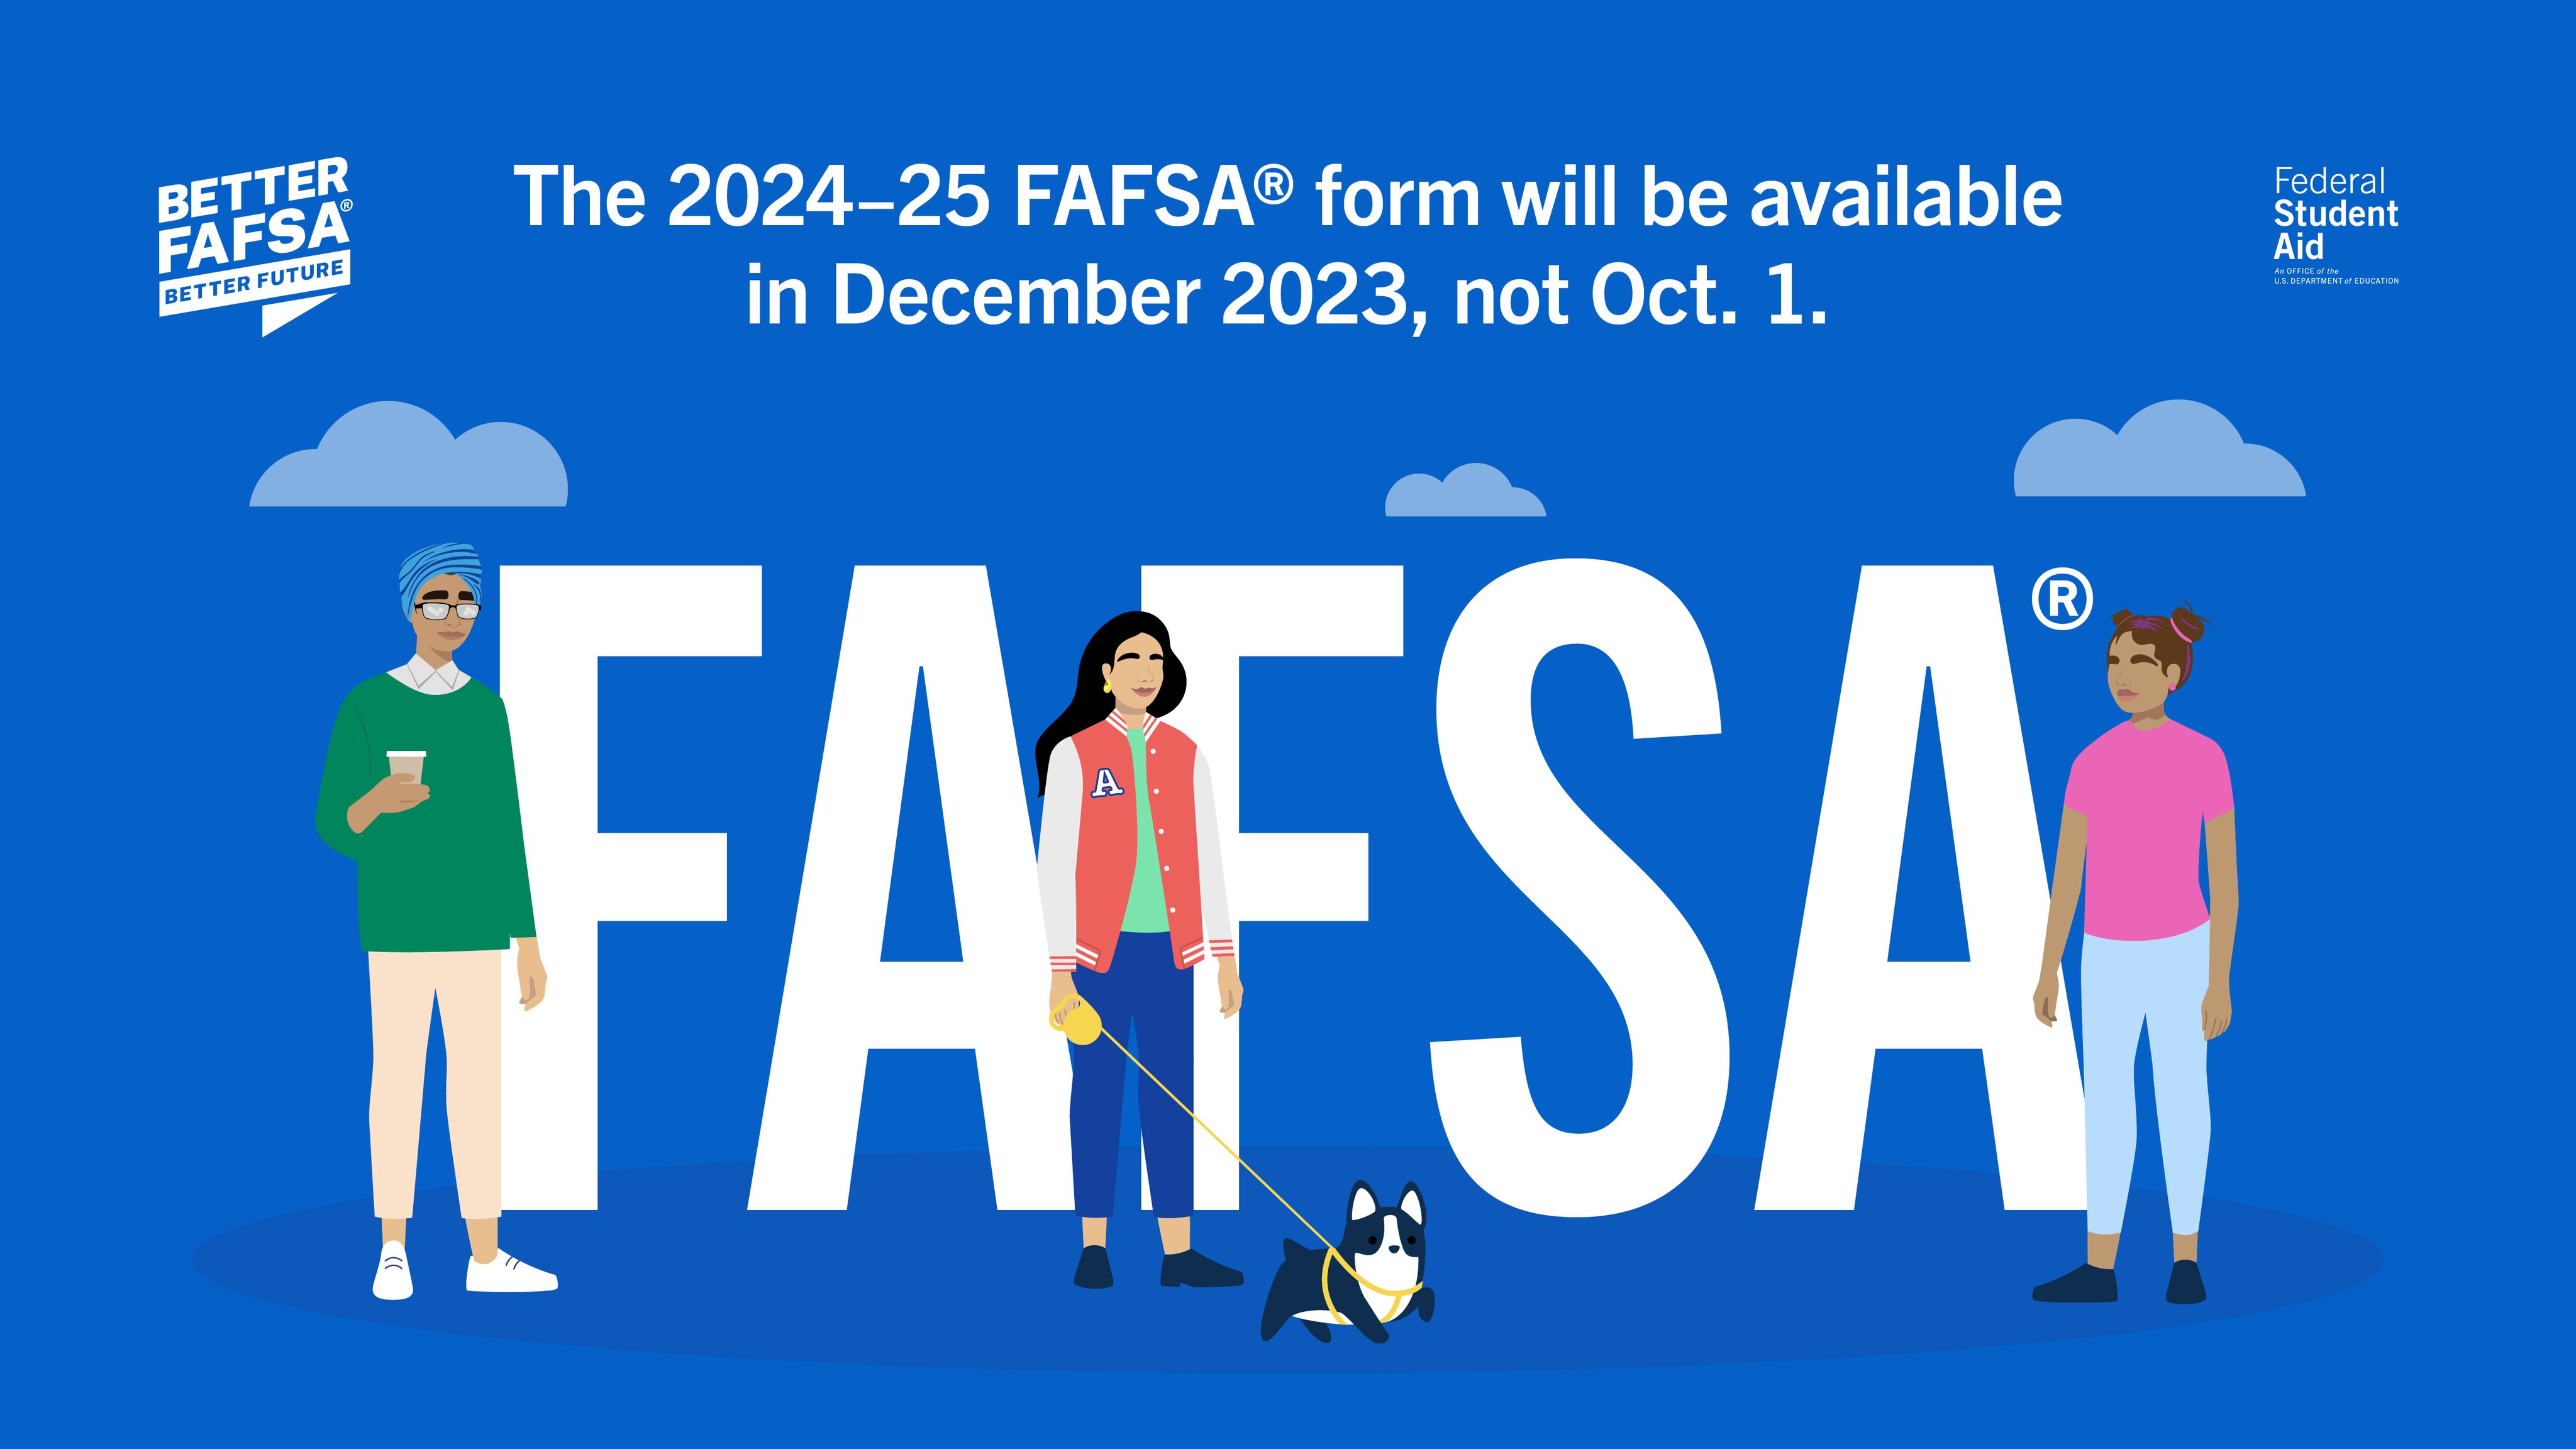 The 2024-254 FAFSA Form: Will be available December 2023 not October 1